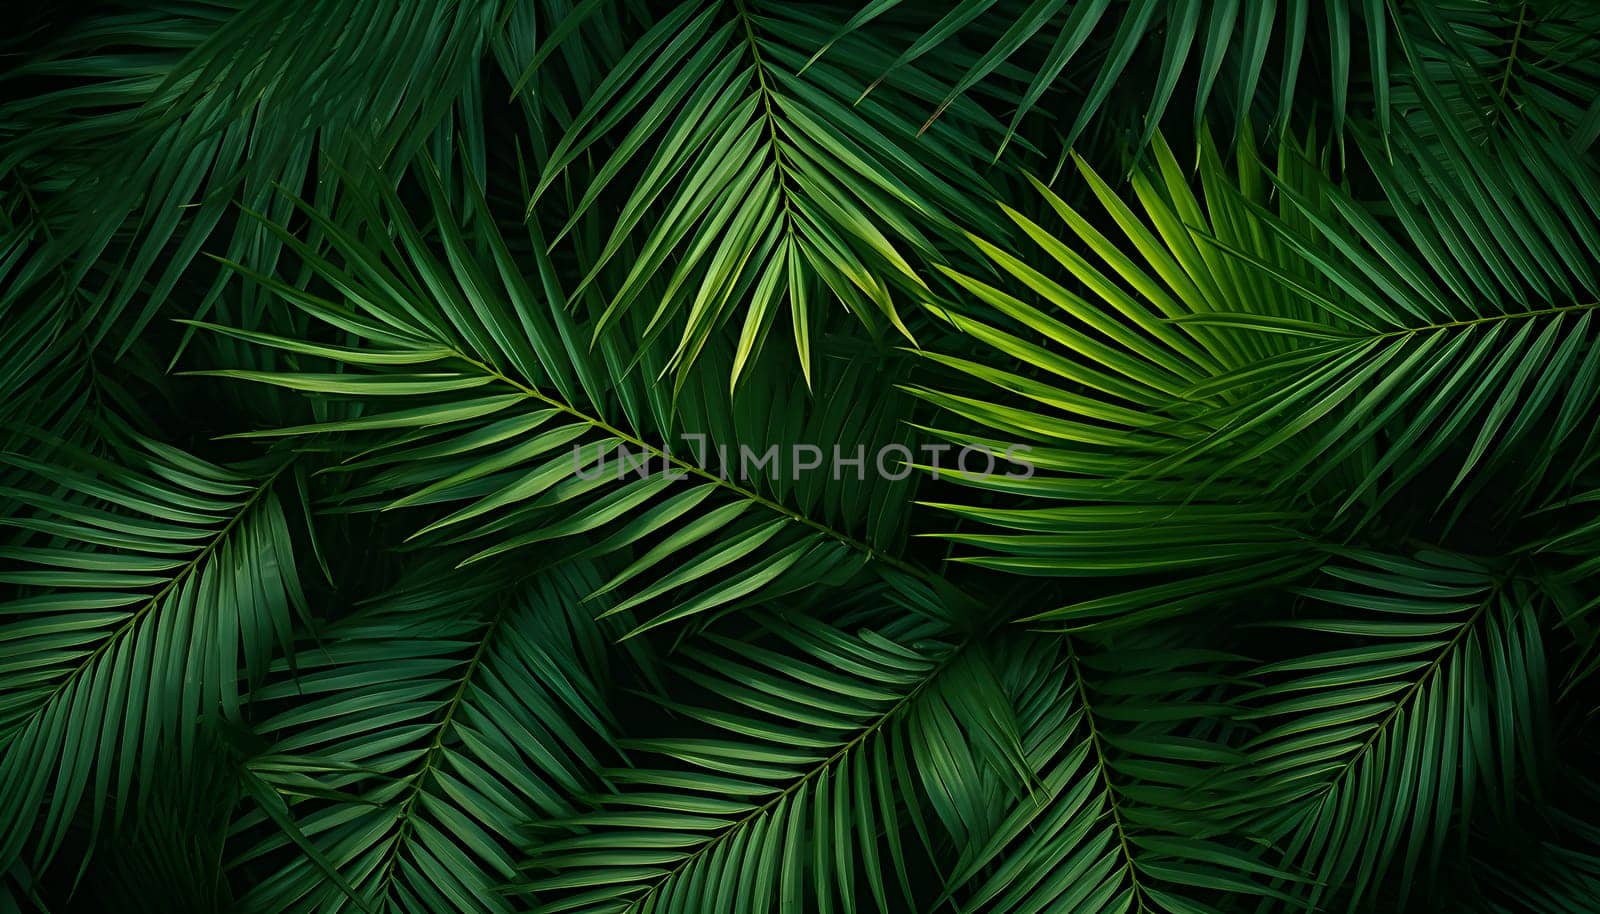 This photo captures the intricate details of vibrant green palm tree leaves, showcasing their unique texture and arrangement up close.